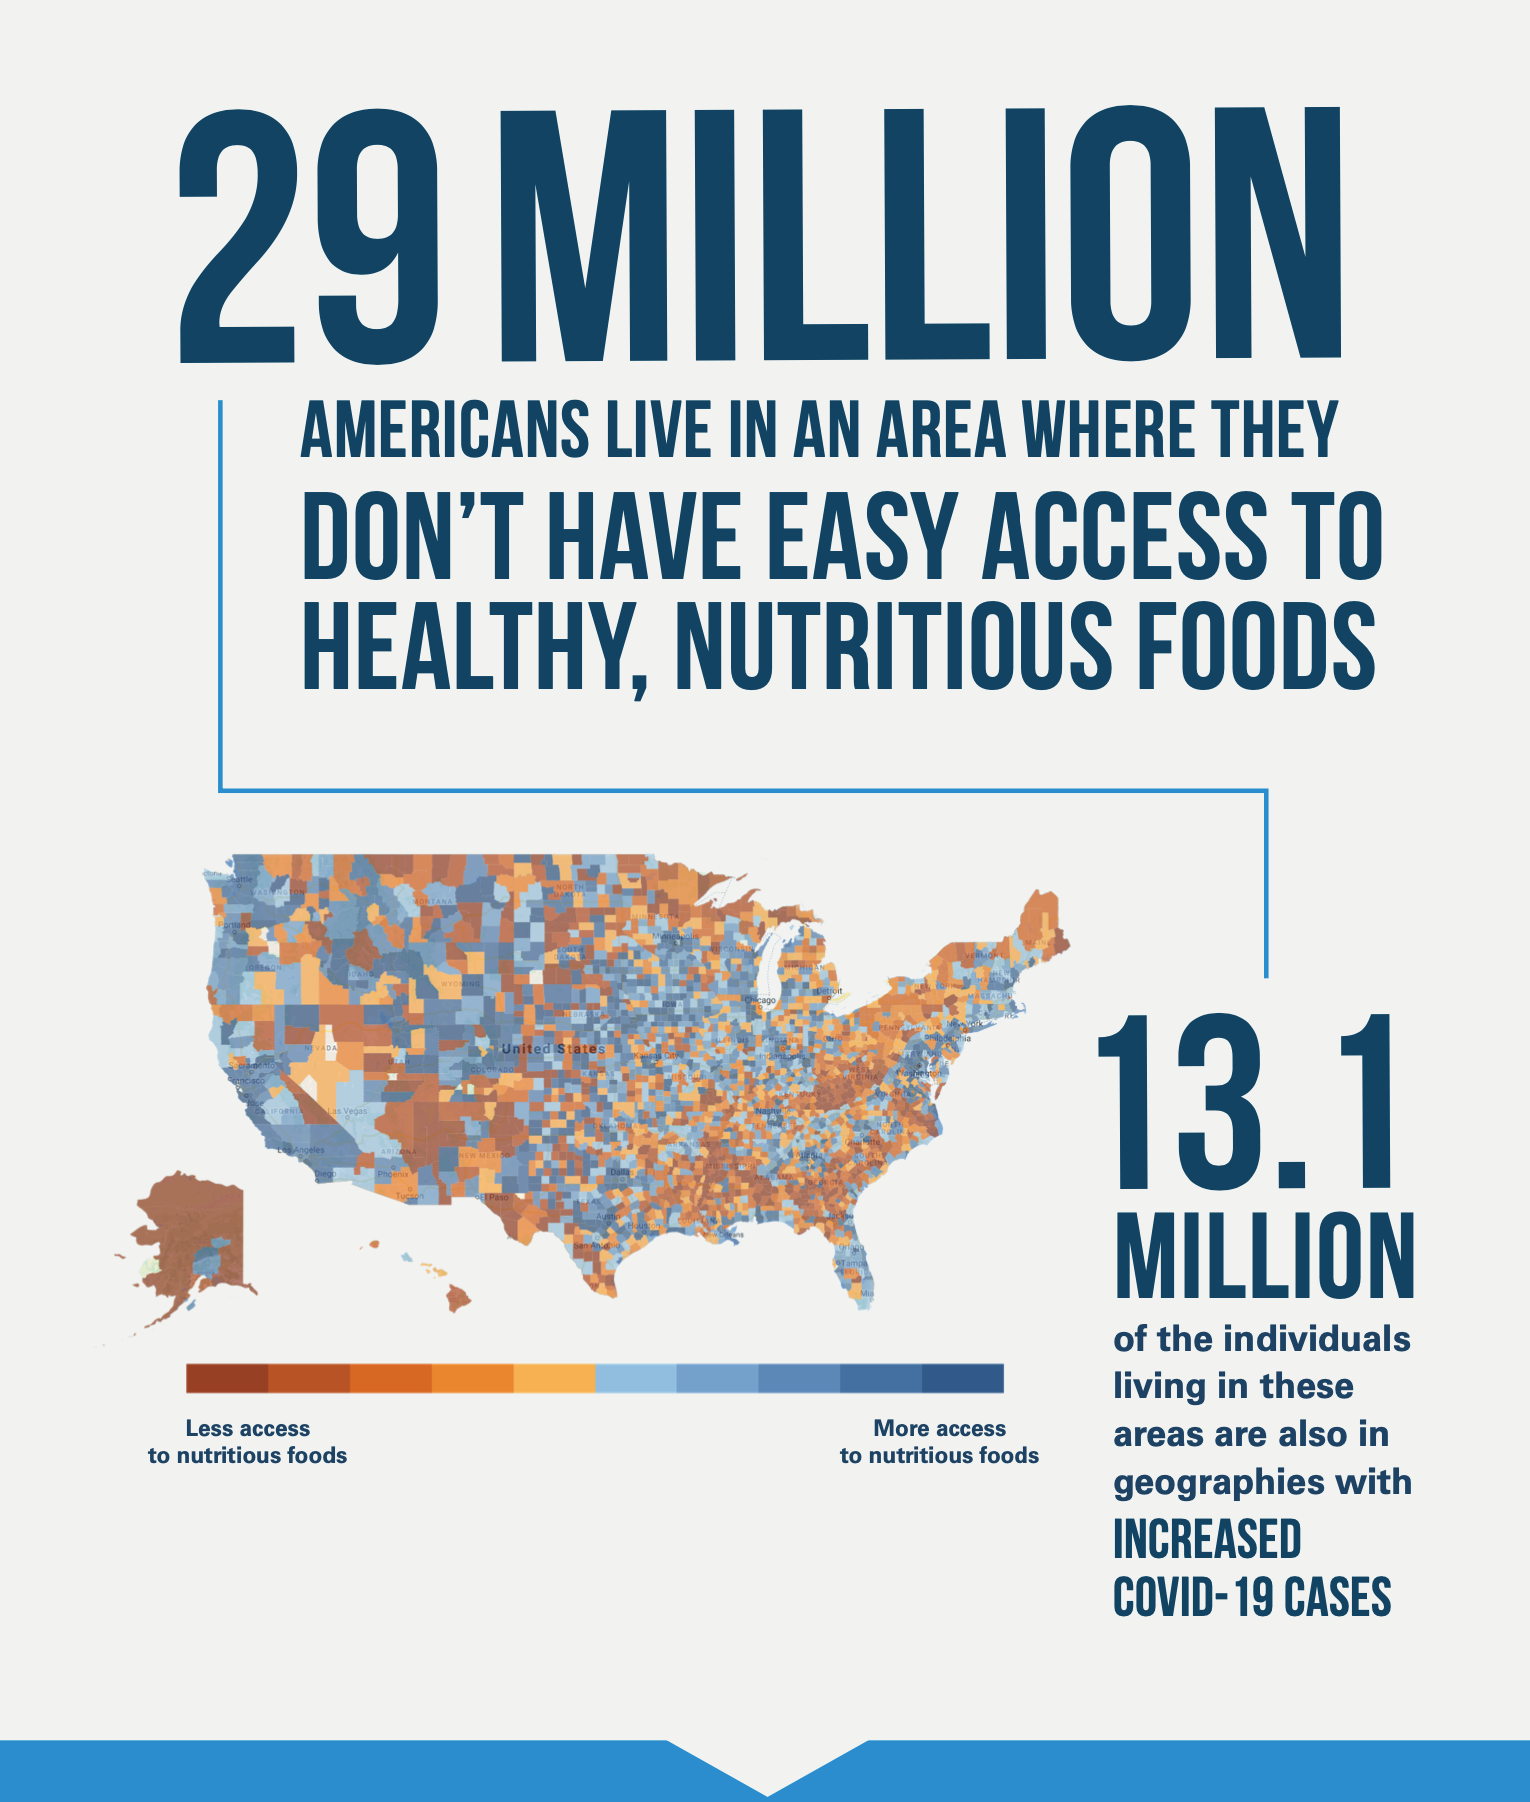 29 million Americans live in an area where they don’t have easy access to healthy, nutritious foods. 13.1 million of the individuals living in these areas are also in geographies with increased COVID-19 cases.